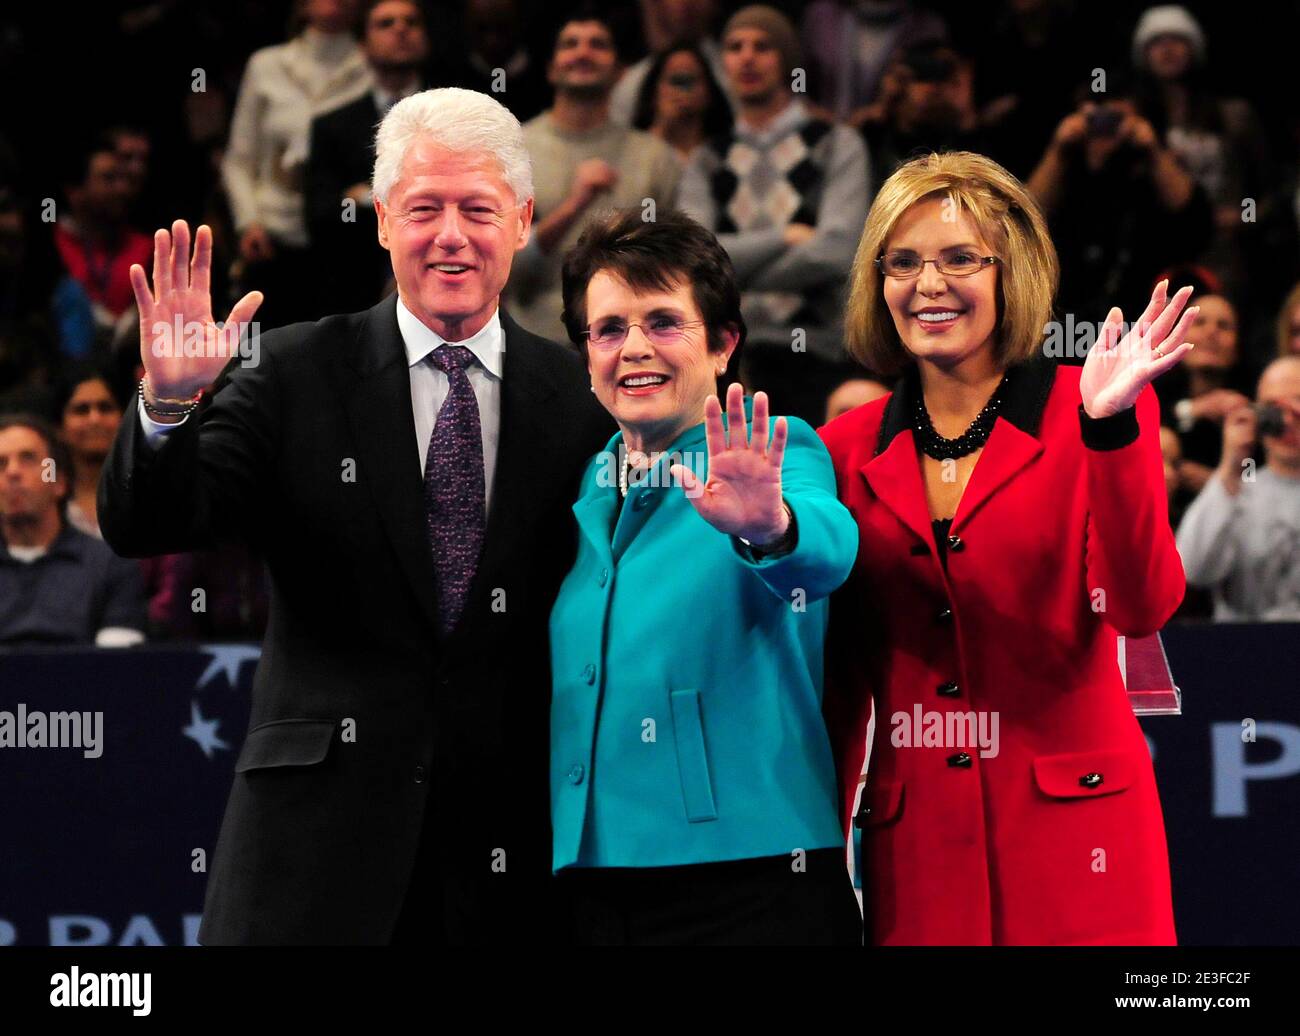 (L-R) Former US President Bill Clinton, Billie Jean King and Leslie Visser pose at the 'BNP Paribas Showdown For The Billie Jean King Cup' matches at Madison Square Garden in New York City, NY, USA on March 2, 2009. The event benefits the Dream Vaccines Foundation and Women's Sports Foundation. Photo by Donna Ward/ABACAPRESS.COM Stock Photo